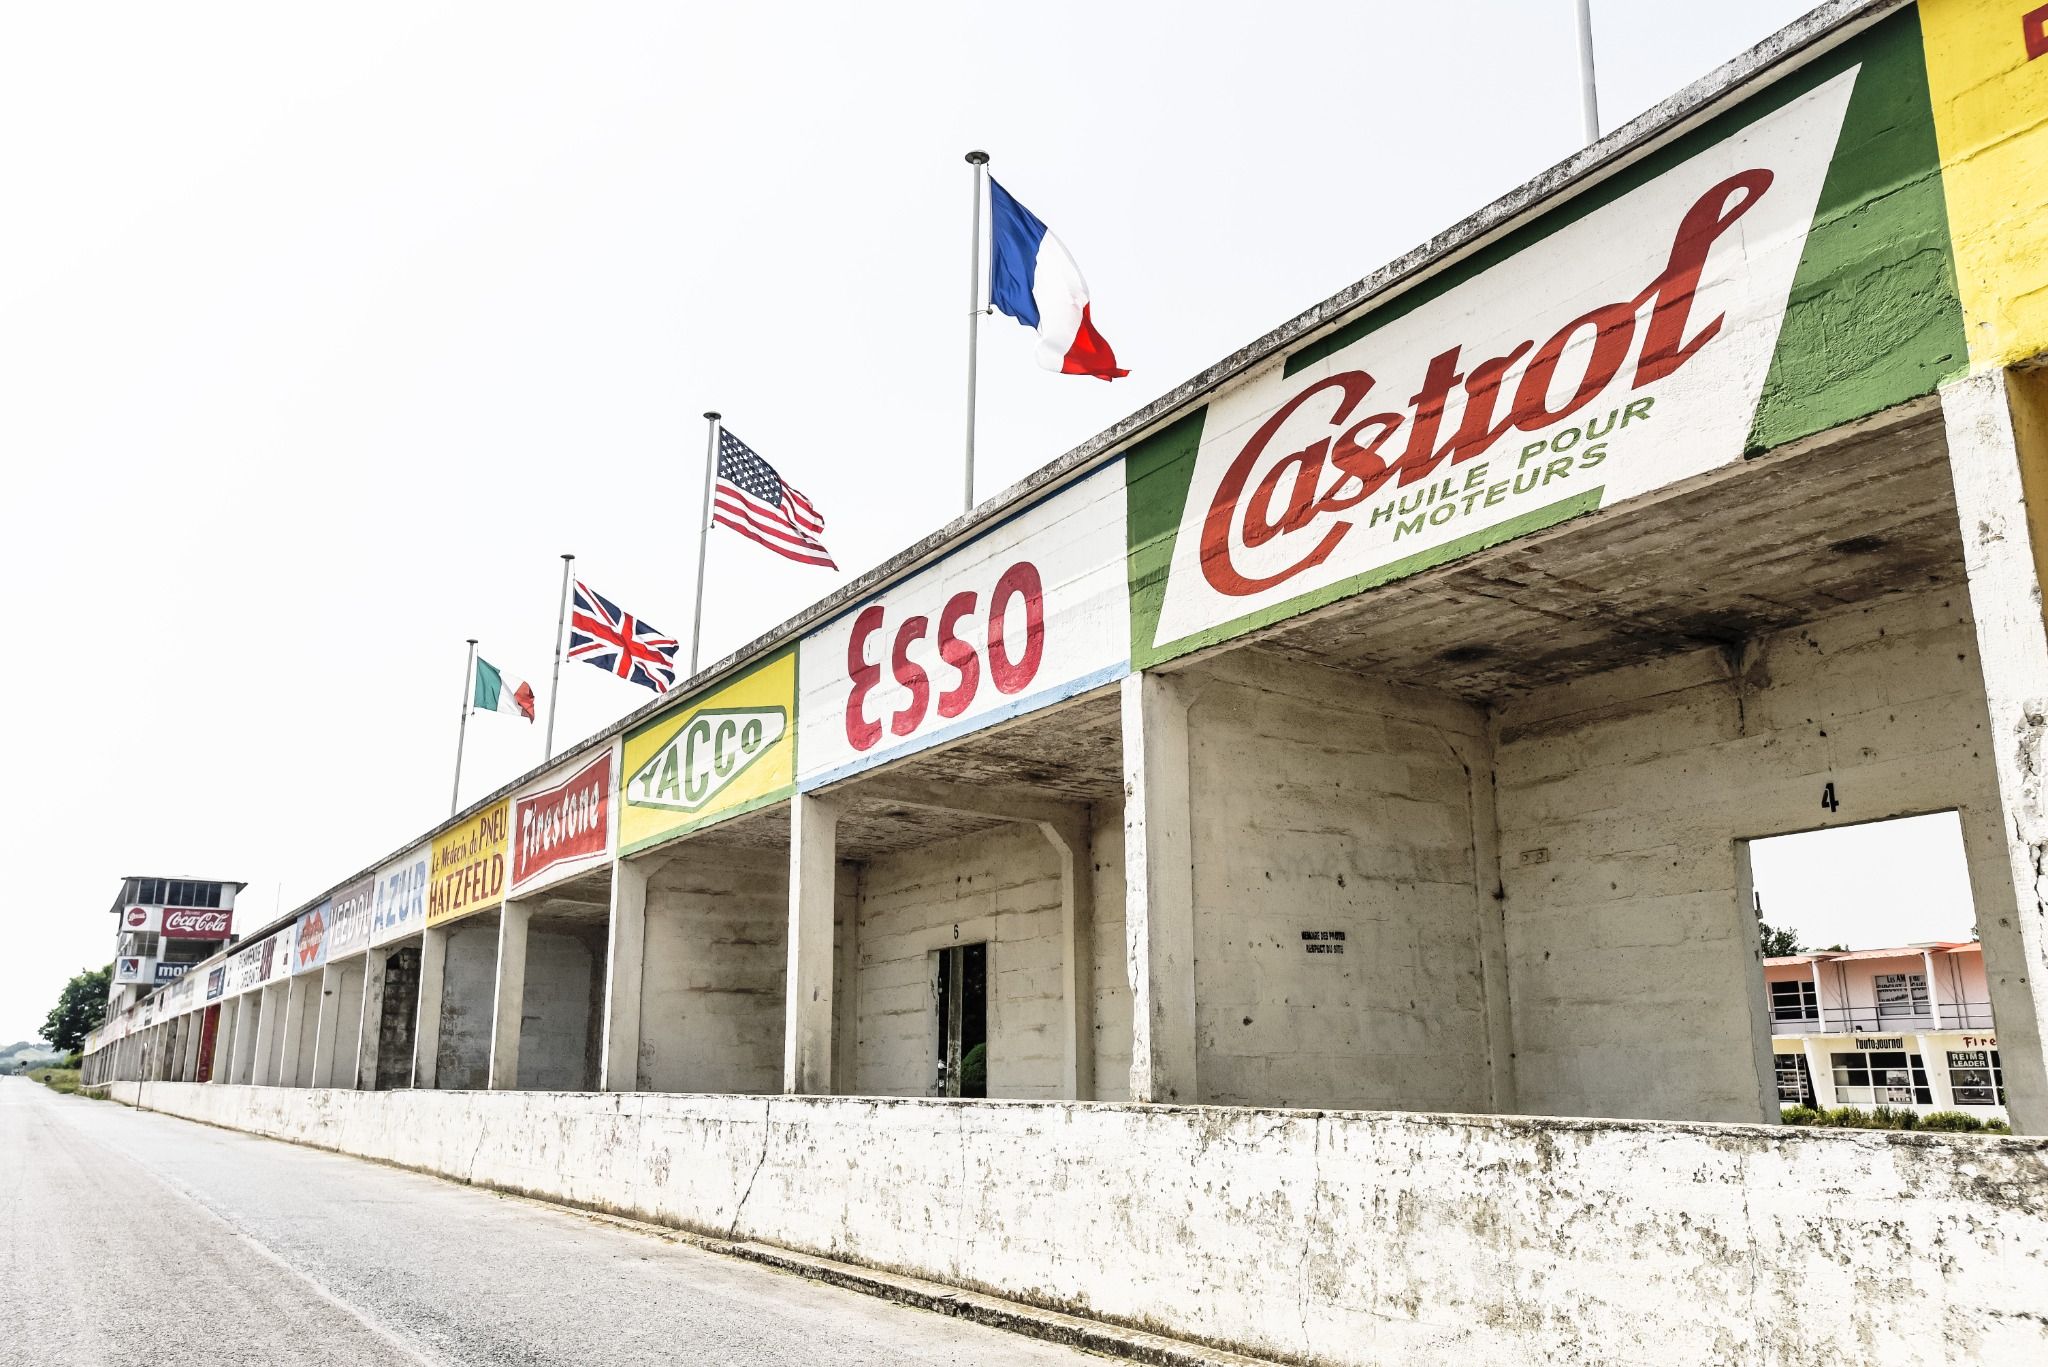 Low angle of an old race track with car brands on the side of the concrete buildings